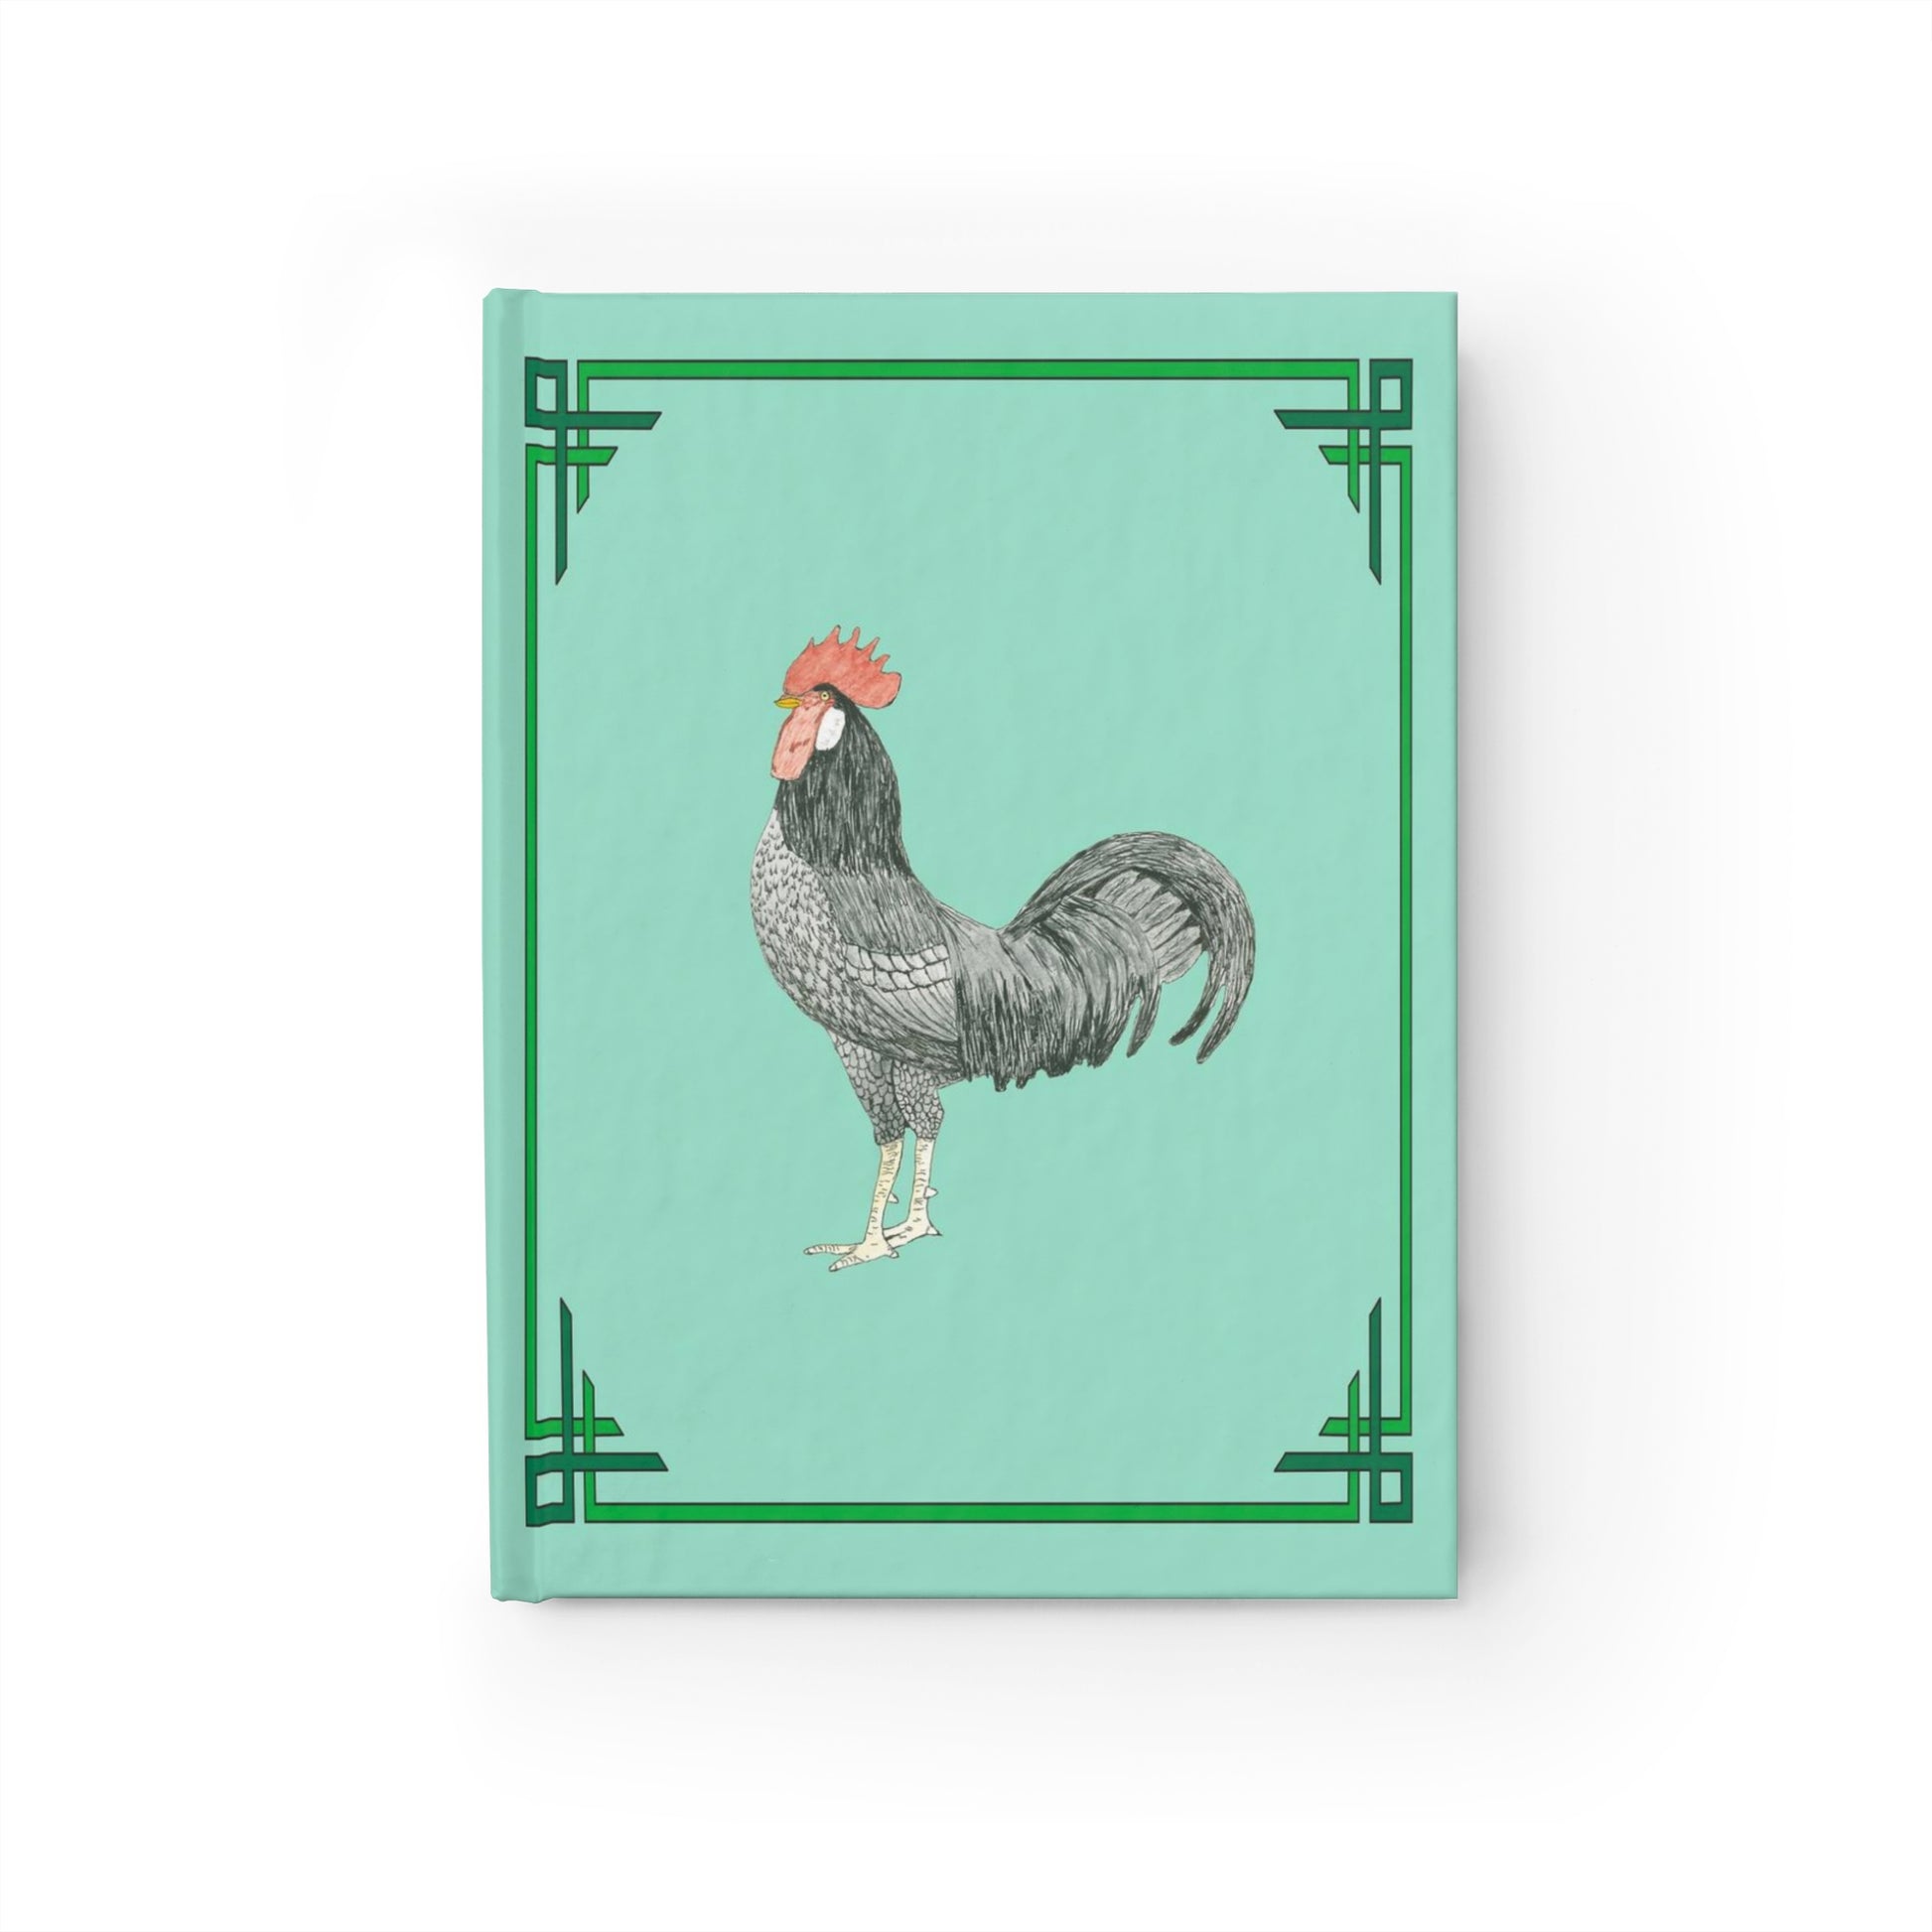 Adam Rooster graces the cover of this lined page journal.